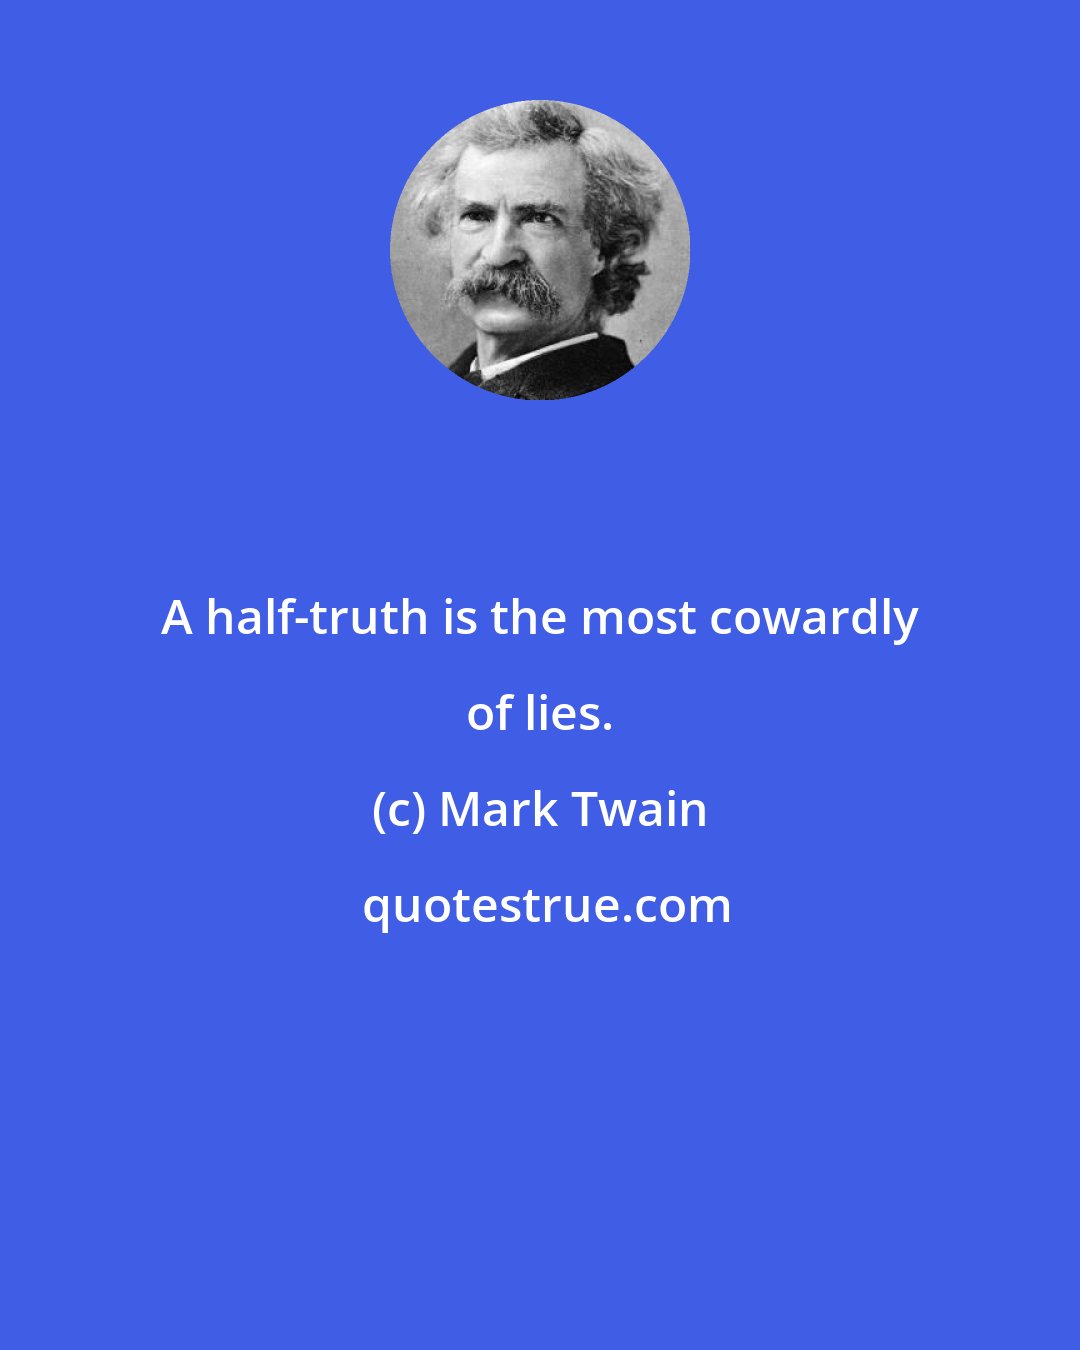 Mark Twain: A half-truth is the most cowardly of lies.